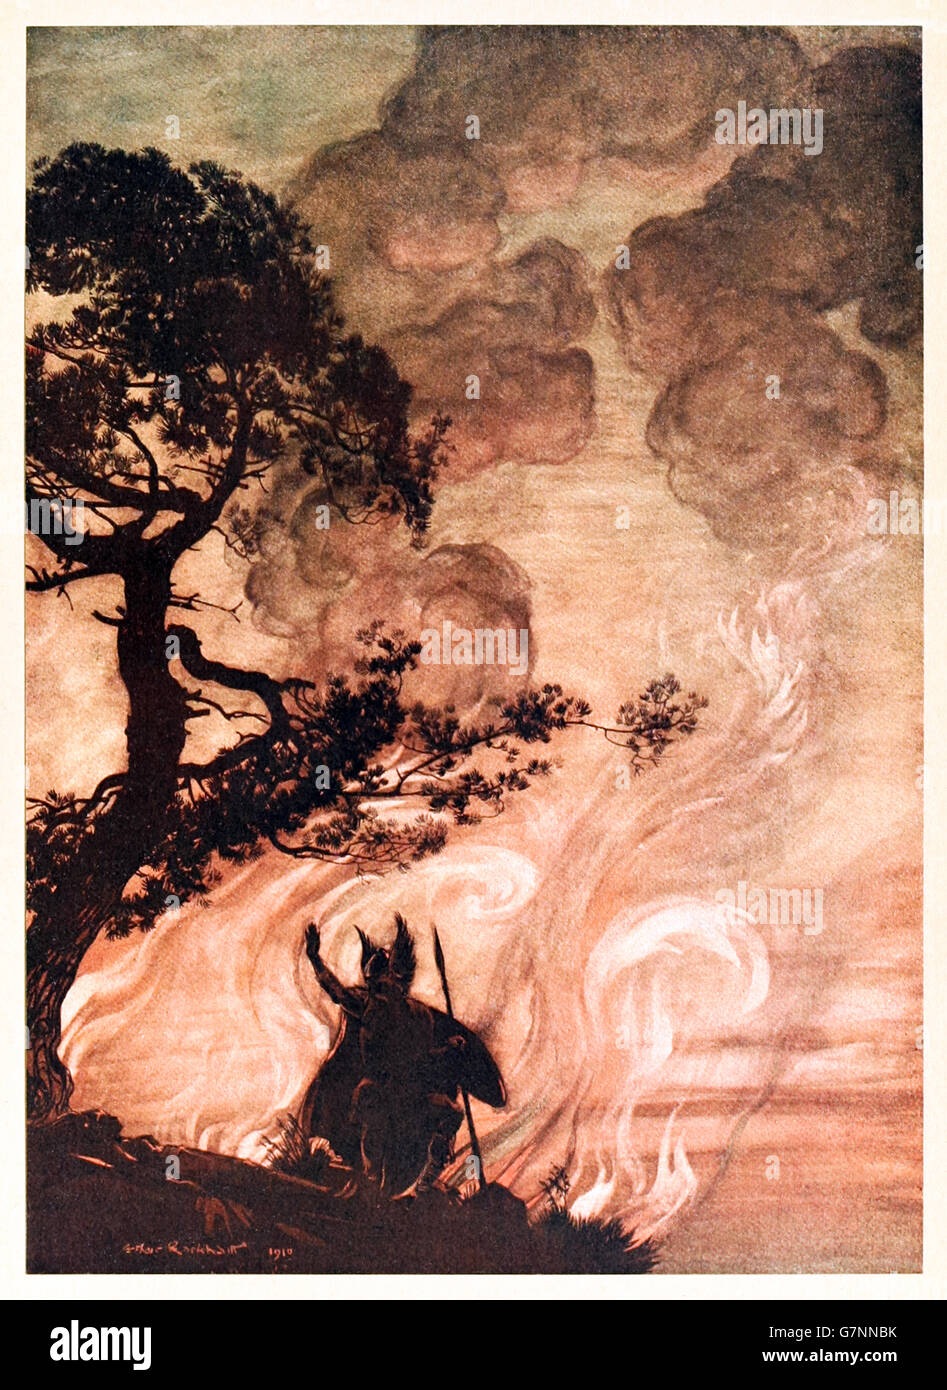 “As he moves slowly away, Wotan turns and looks sorrowfully back at Brunnhilde” from ‘The Rhinegold & the Valkyrie’ illustrated by Arthur Rackham (1867-1939), published in 1910. Wotan leaves Brünnhilde in her enchanted sleep surrounded in a circle of flame lit by Loge. Stock Photo